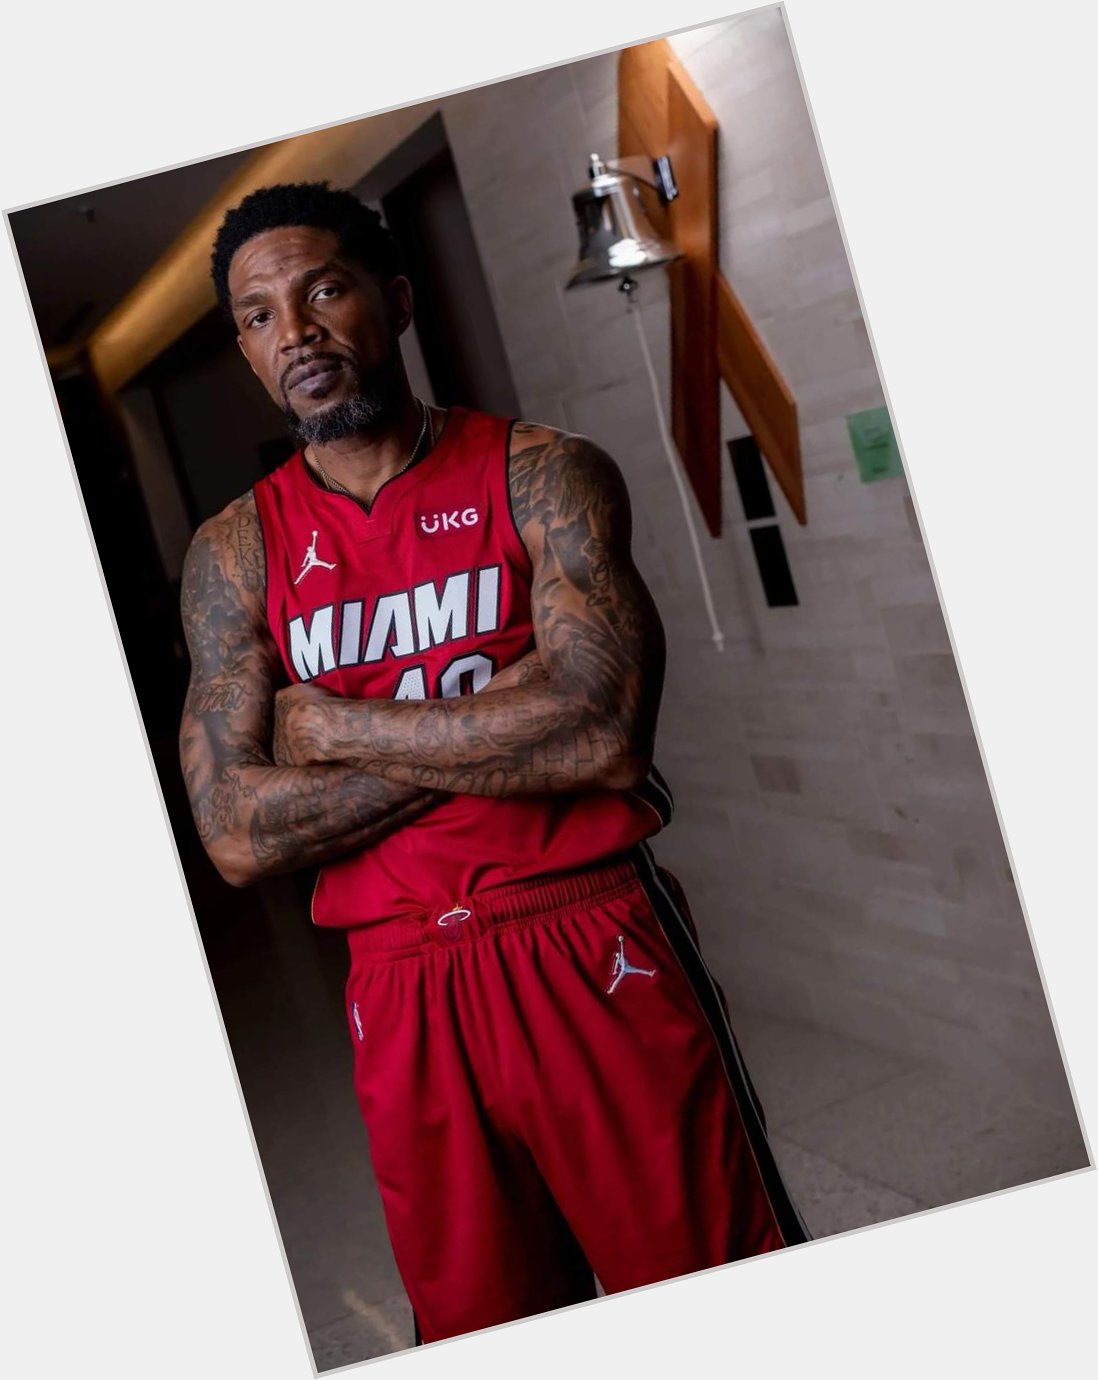 Happy 42nd Birthday to Udonis Haslem! 